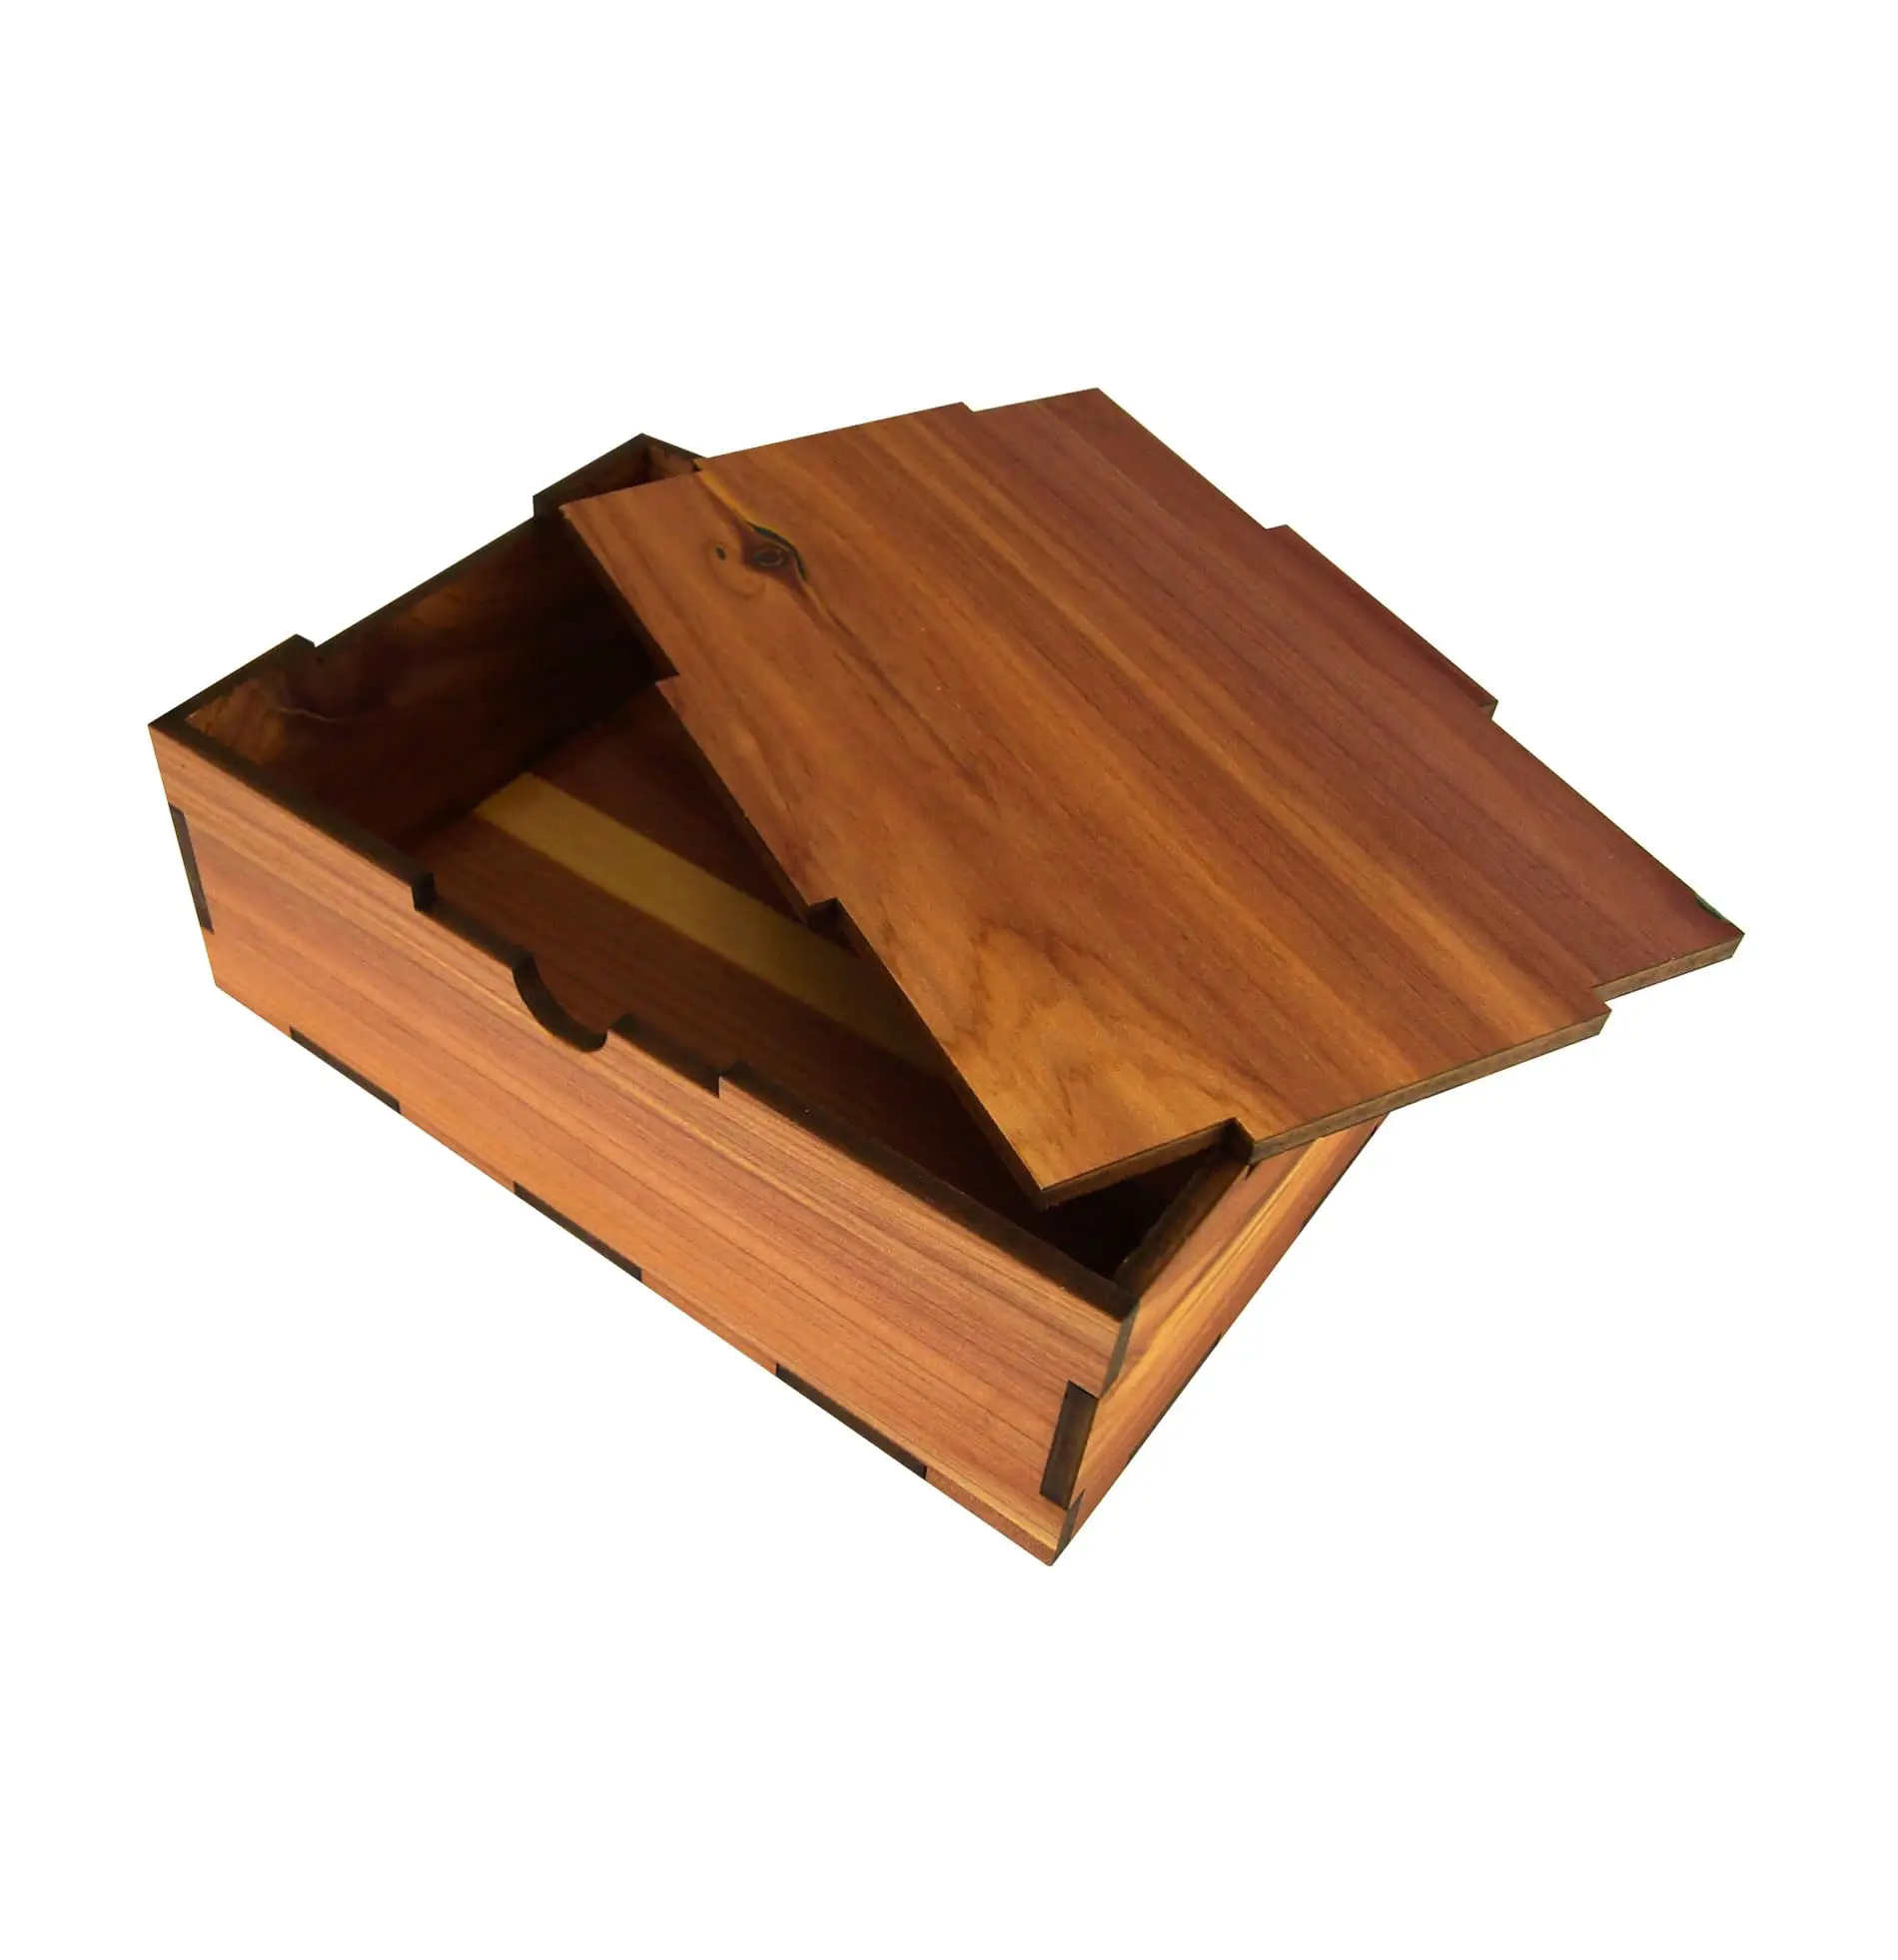 Wooden Wedding Memory Crafts Wine Gift Trankit Box Dry Fruit Empty Box Size 3 X 6 4x6 Inches With Slide Lids For Keepsakes